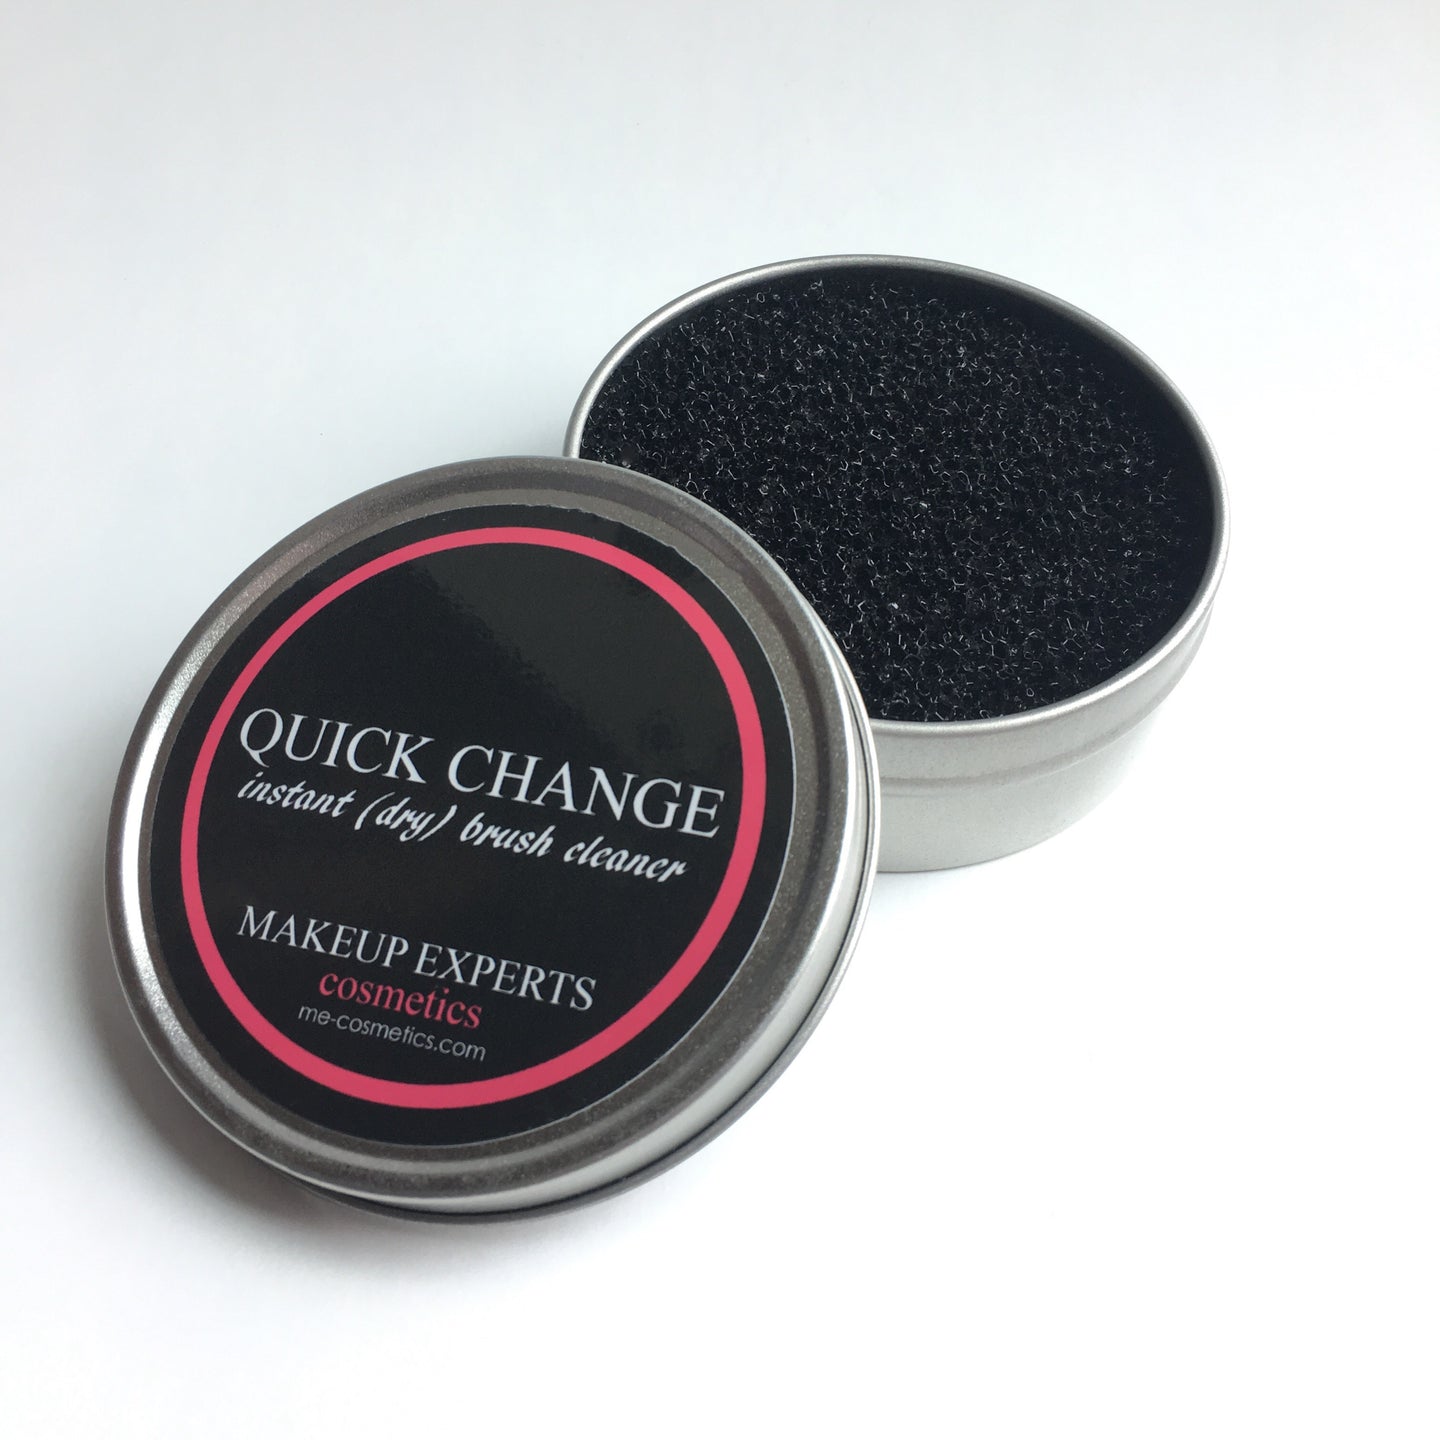 QUICK CHANGE instant (dry) brush cleaner - M.E. cosmetics